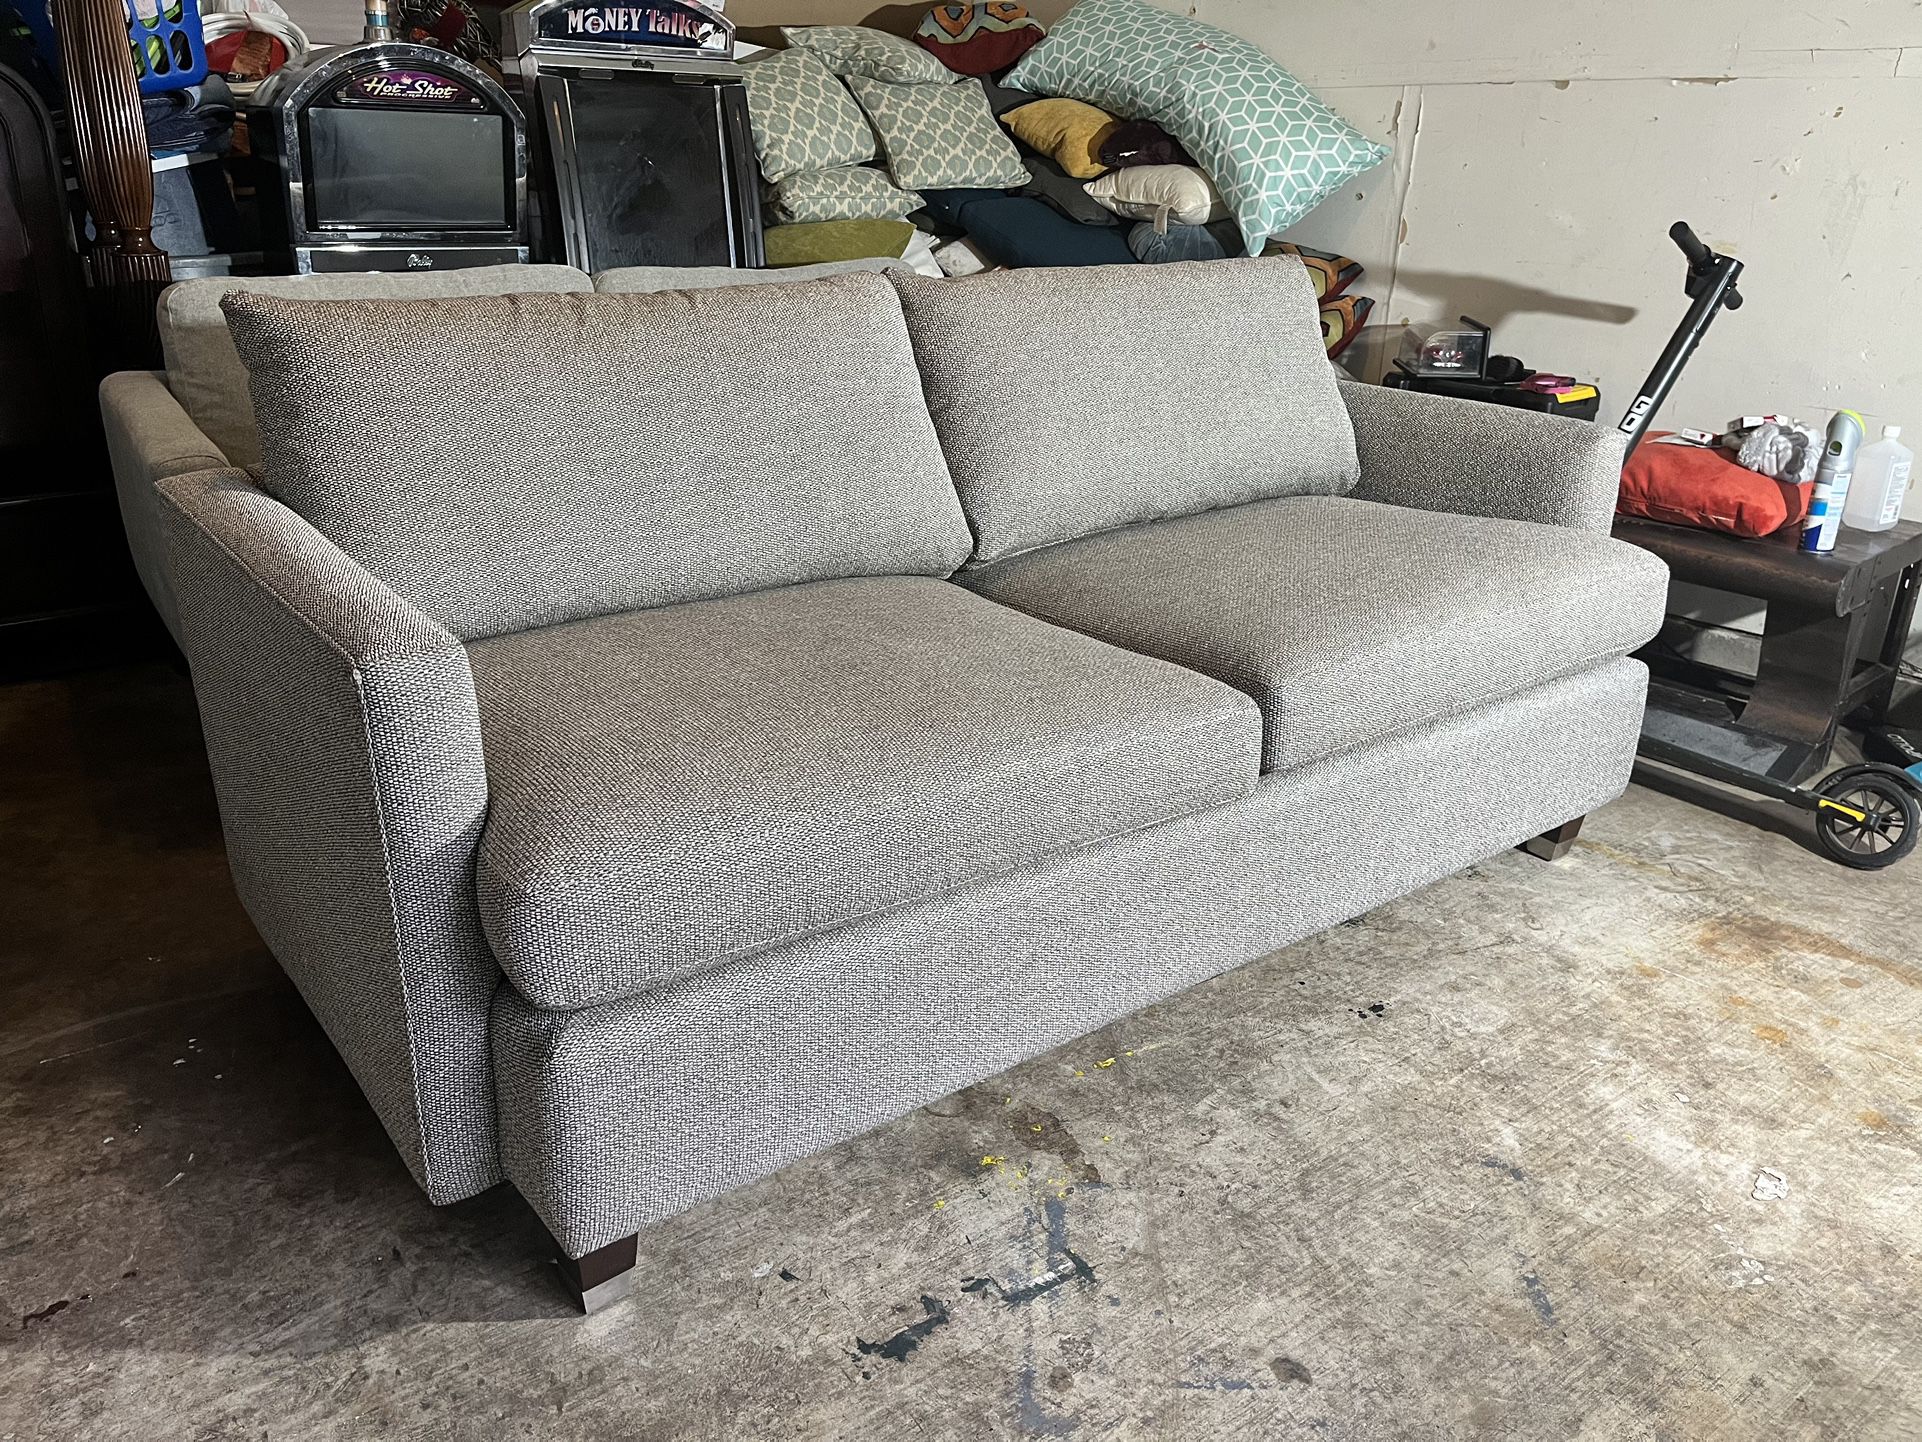 Crate & Barrel couch sofa loveseat 